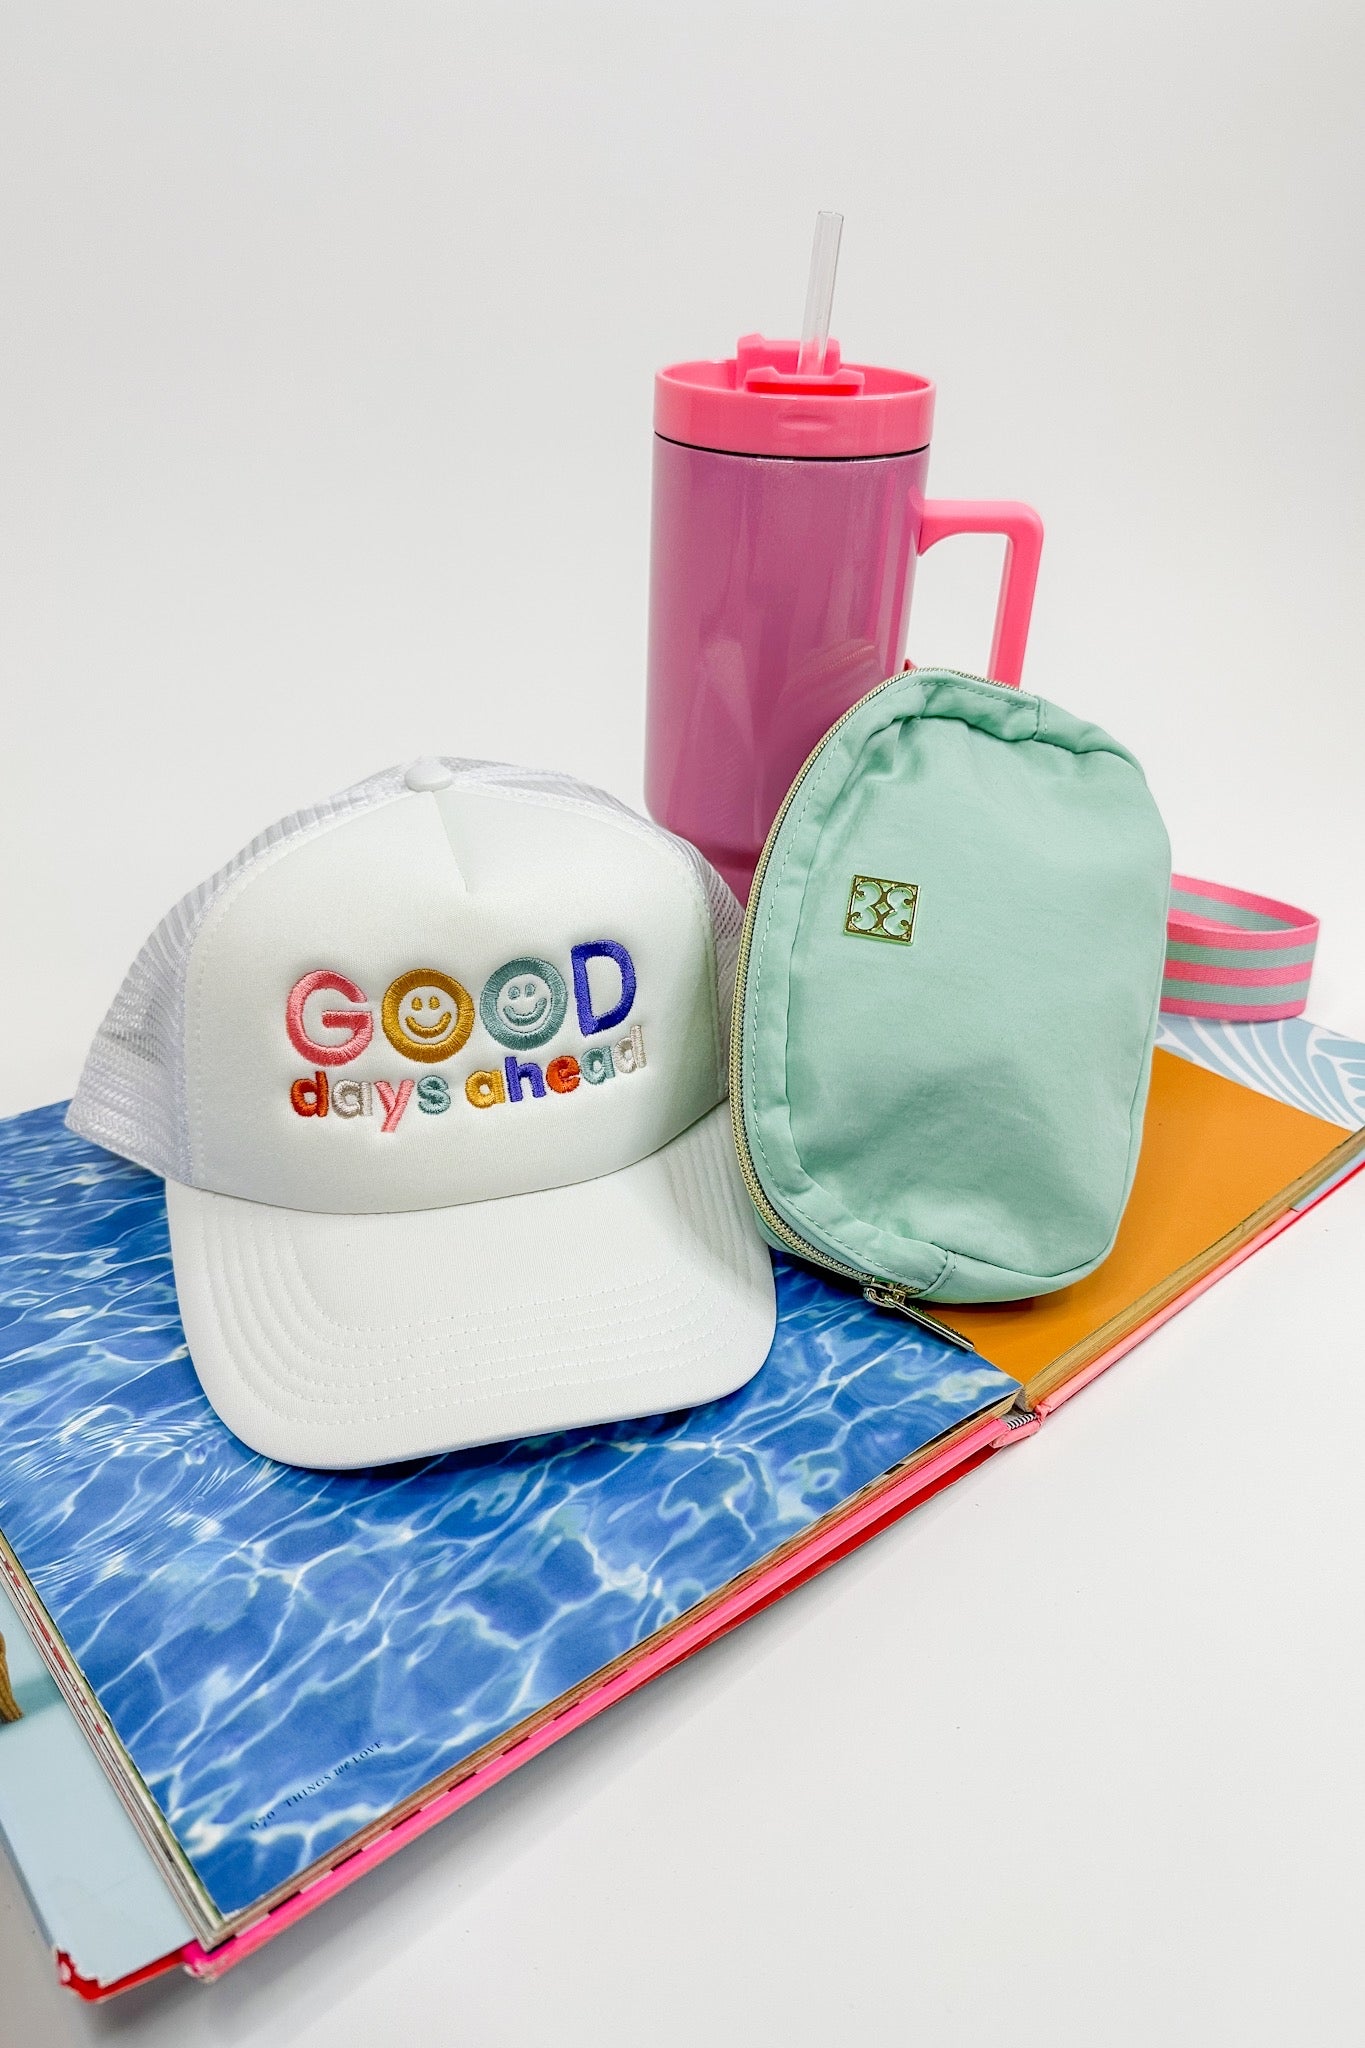 Good Days Ahead Smiley Embroidered White Trucker Hat